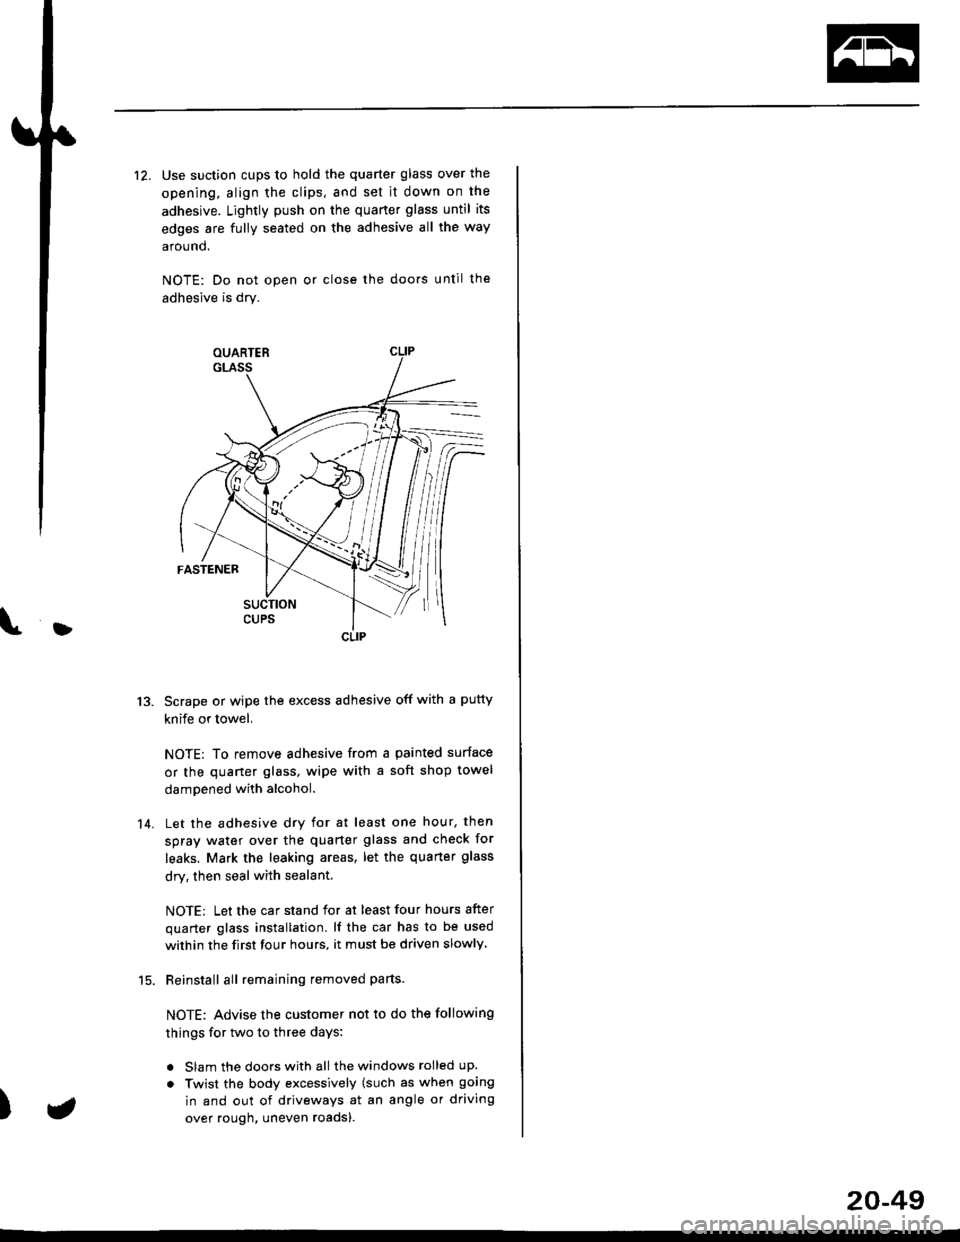 HONDA CIVIC 1996 6.G Workshop Manual }
12. Use suction cups to hold the quarter glass over the
opening, align the clips, and set it down on the
adhesive. Lightly push on the quarter glass until its
edges are fully seated on the adhesive 